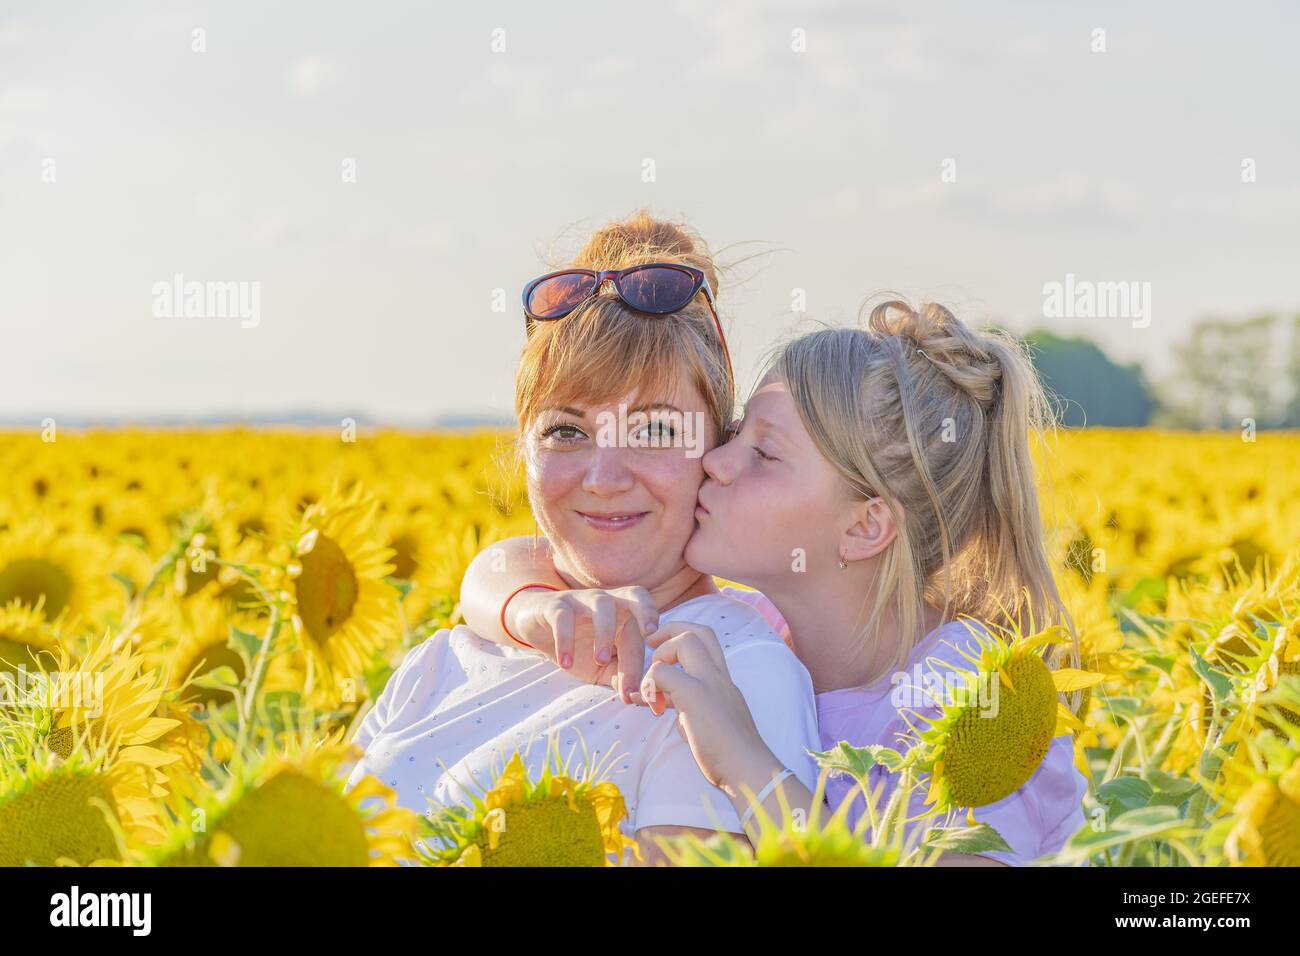 Girl hugs her mother by the neck and gently kisses her on the cheek. Children's love for parents. Stock Photo